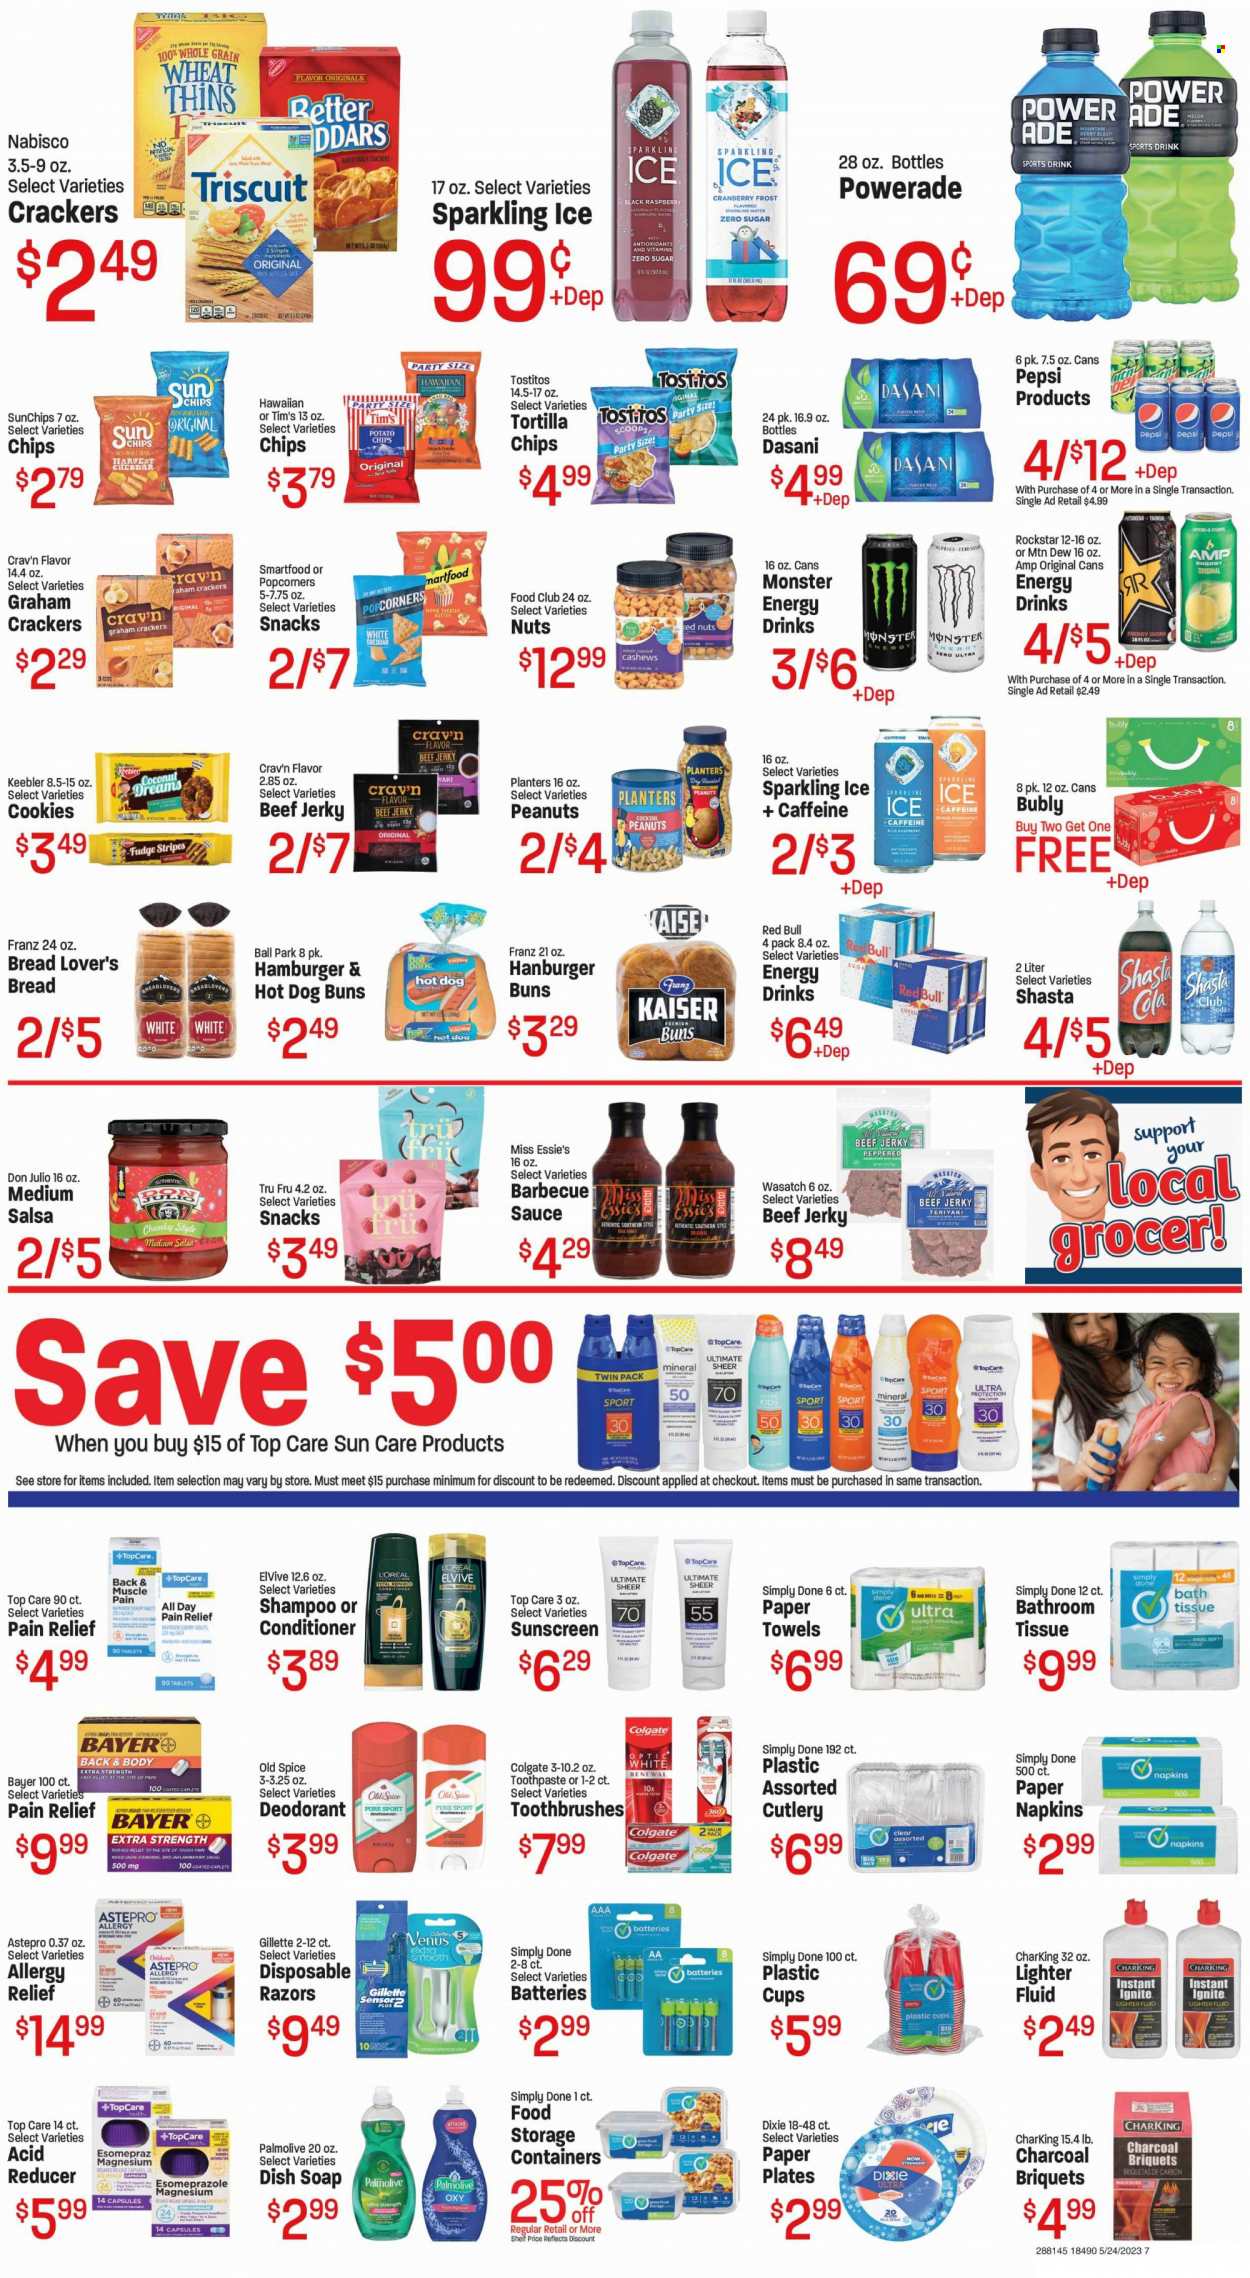 thumbnail - Red Apple Marketplace Flyer - 05/24/2023 - 05/30/2023 - Sales products - buns, hamburger, beef jerky, jerky, cheese, cookies, fudge, graham crackers, snack, crackers, Keebler, Nabisco, tortilla chips, potato chips, chips, Smartfood, Thins, popcorn, Tostitos, salsa, honey, cashews, peanuts, Planters, Mountain Dew, Powerade, Pepsi, energy drink, Monster, soft drink, Red Bull, Monster Energy, Rockstar, flavored water, sparkling water, water, napkins, bath tissue, kitchen towels, paper towels, dishwashing liquid, shampoo, Old Spice, Palmolive, Colgate, toothpaste, L’Oréal, sun care, conditioner, body lotion, anti-perspirant, deodorant, Gillette, razor, Venus, disposable razor, melons. Page 7.